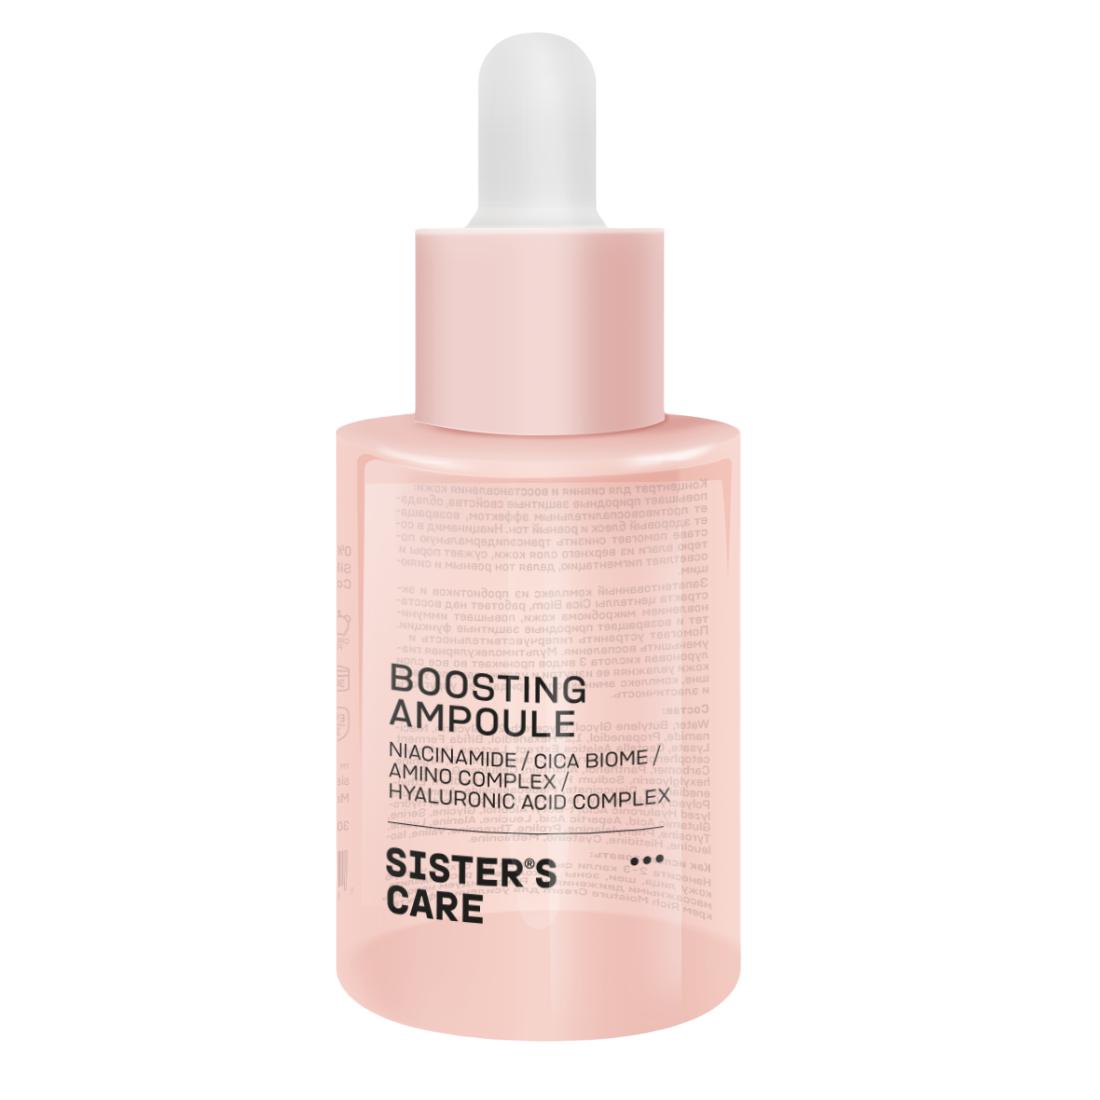 Сыворотка Sister's Aroma Boosting Ampoule, 30 мл - фото 1